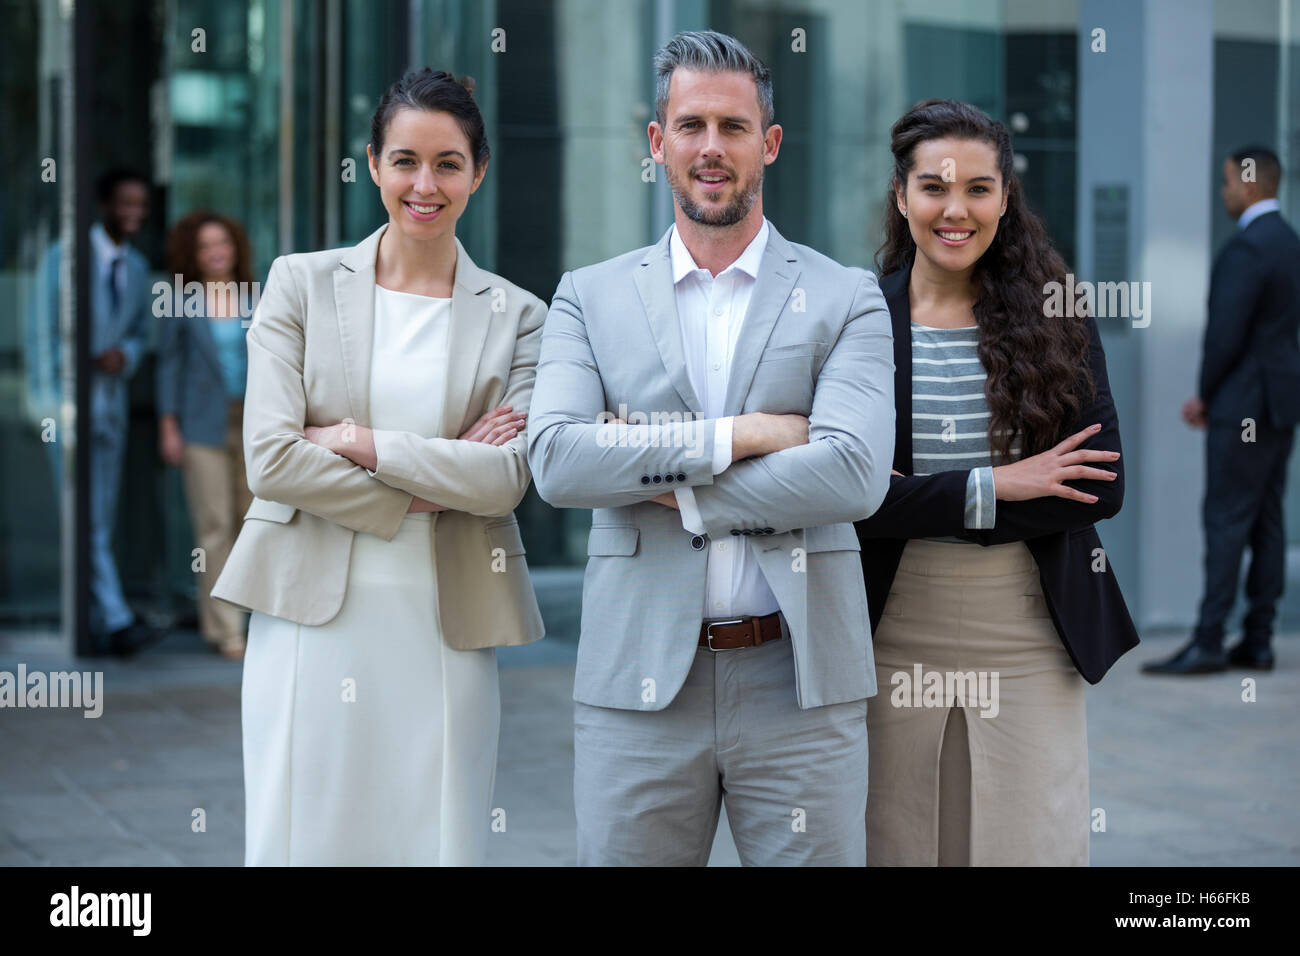 Smiling businesspeople standing with arms crossed in office building Stock Photo